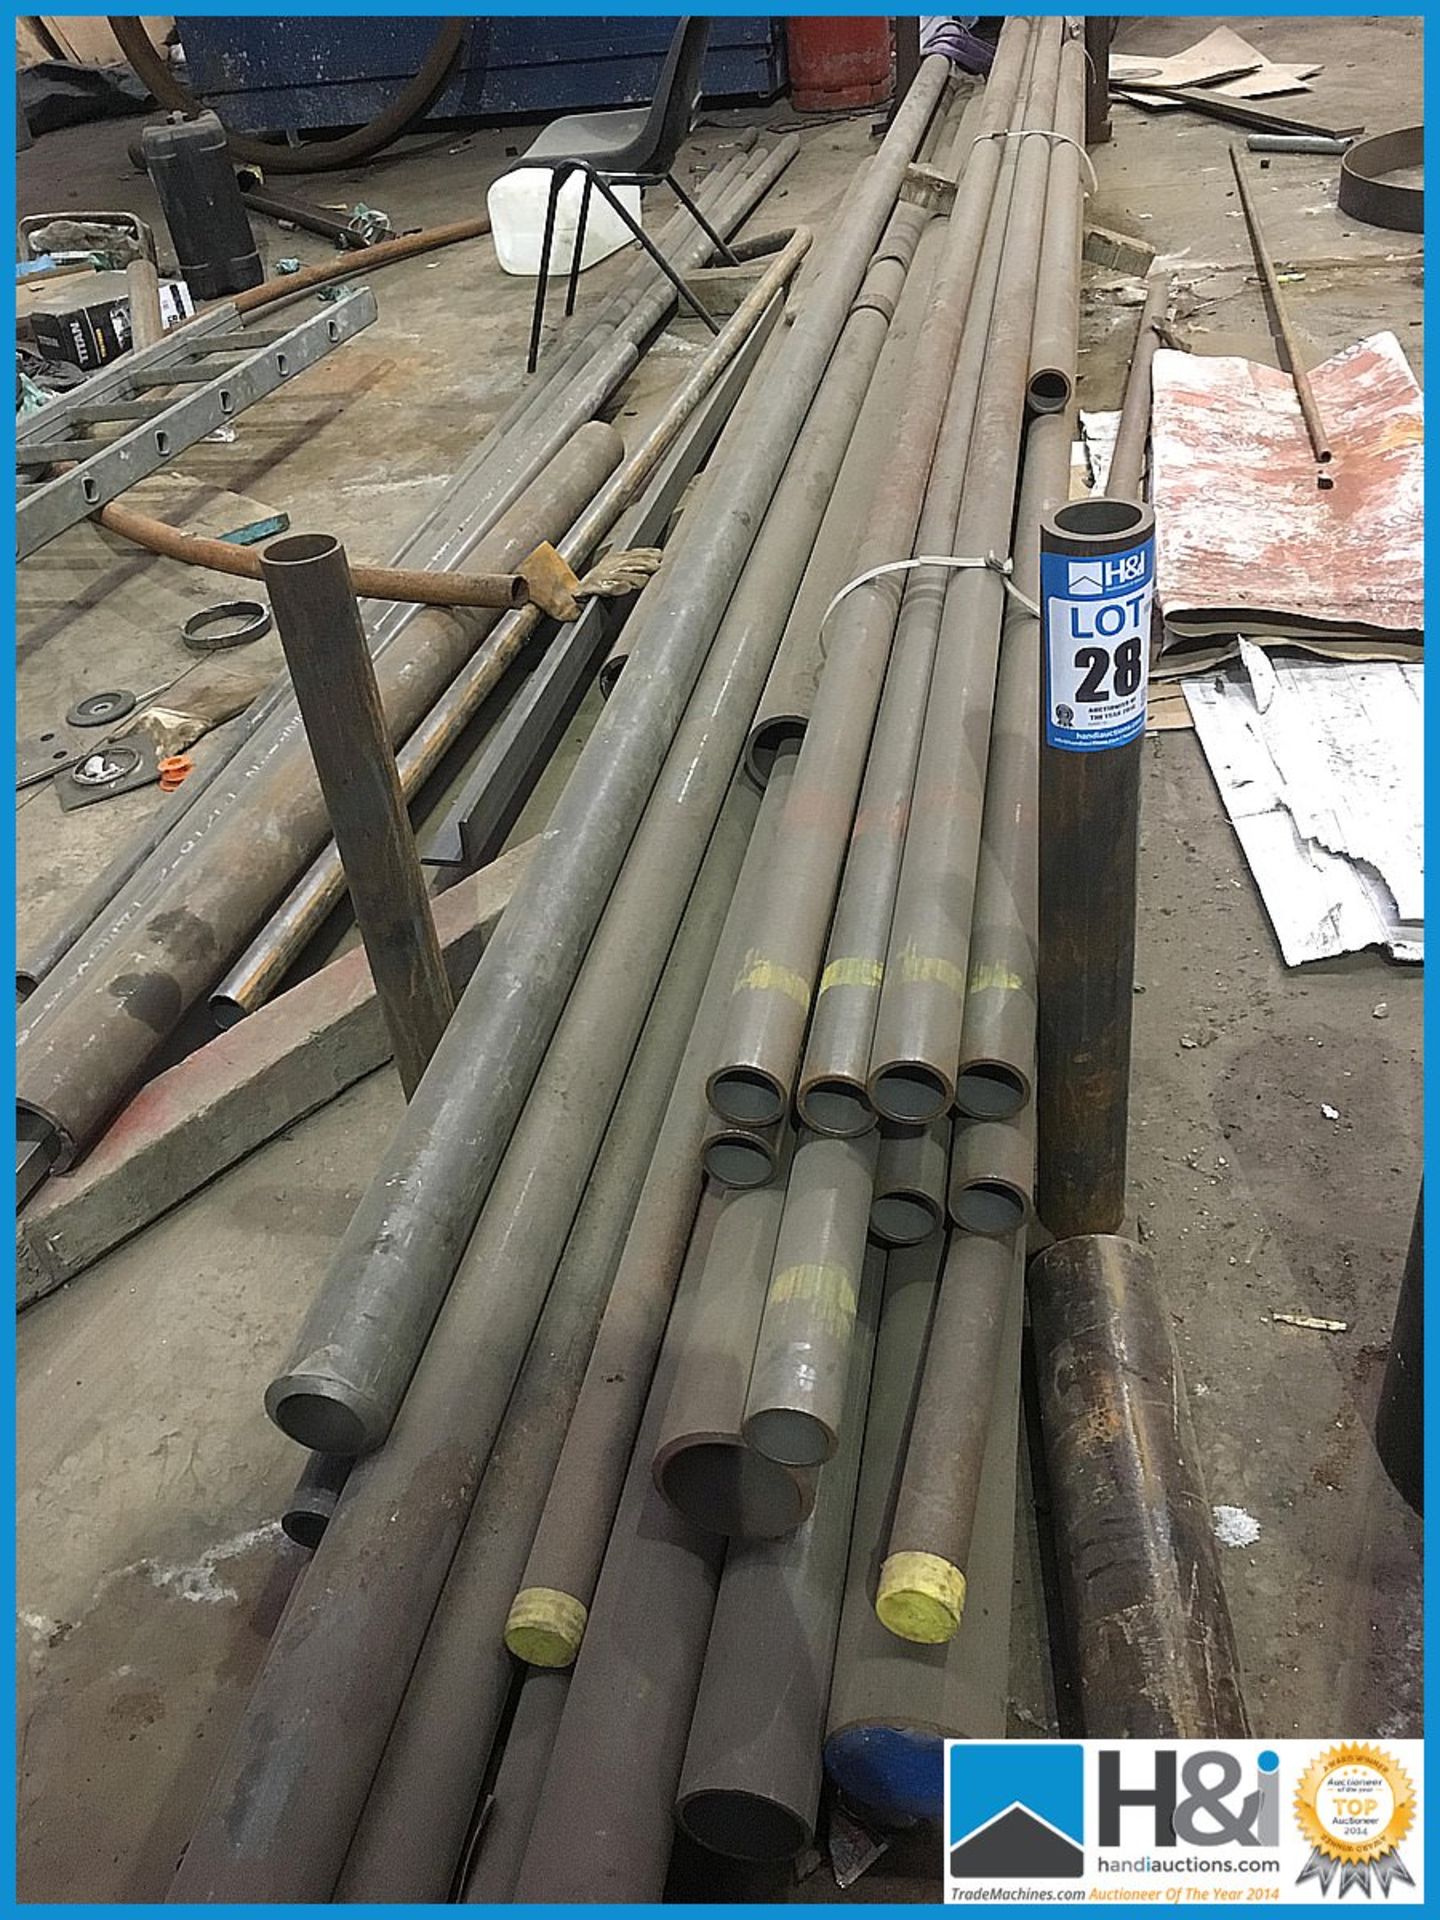 Excellent lot of high pressure steel stock tubing with certification if required. No VAT on this lot